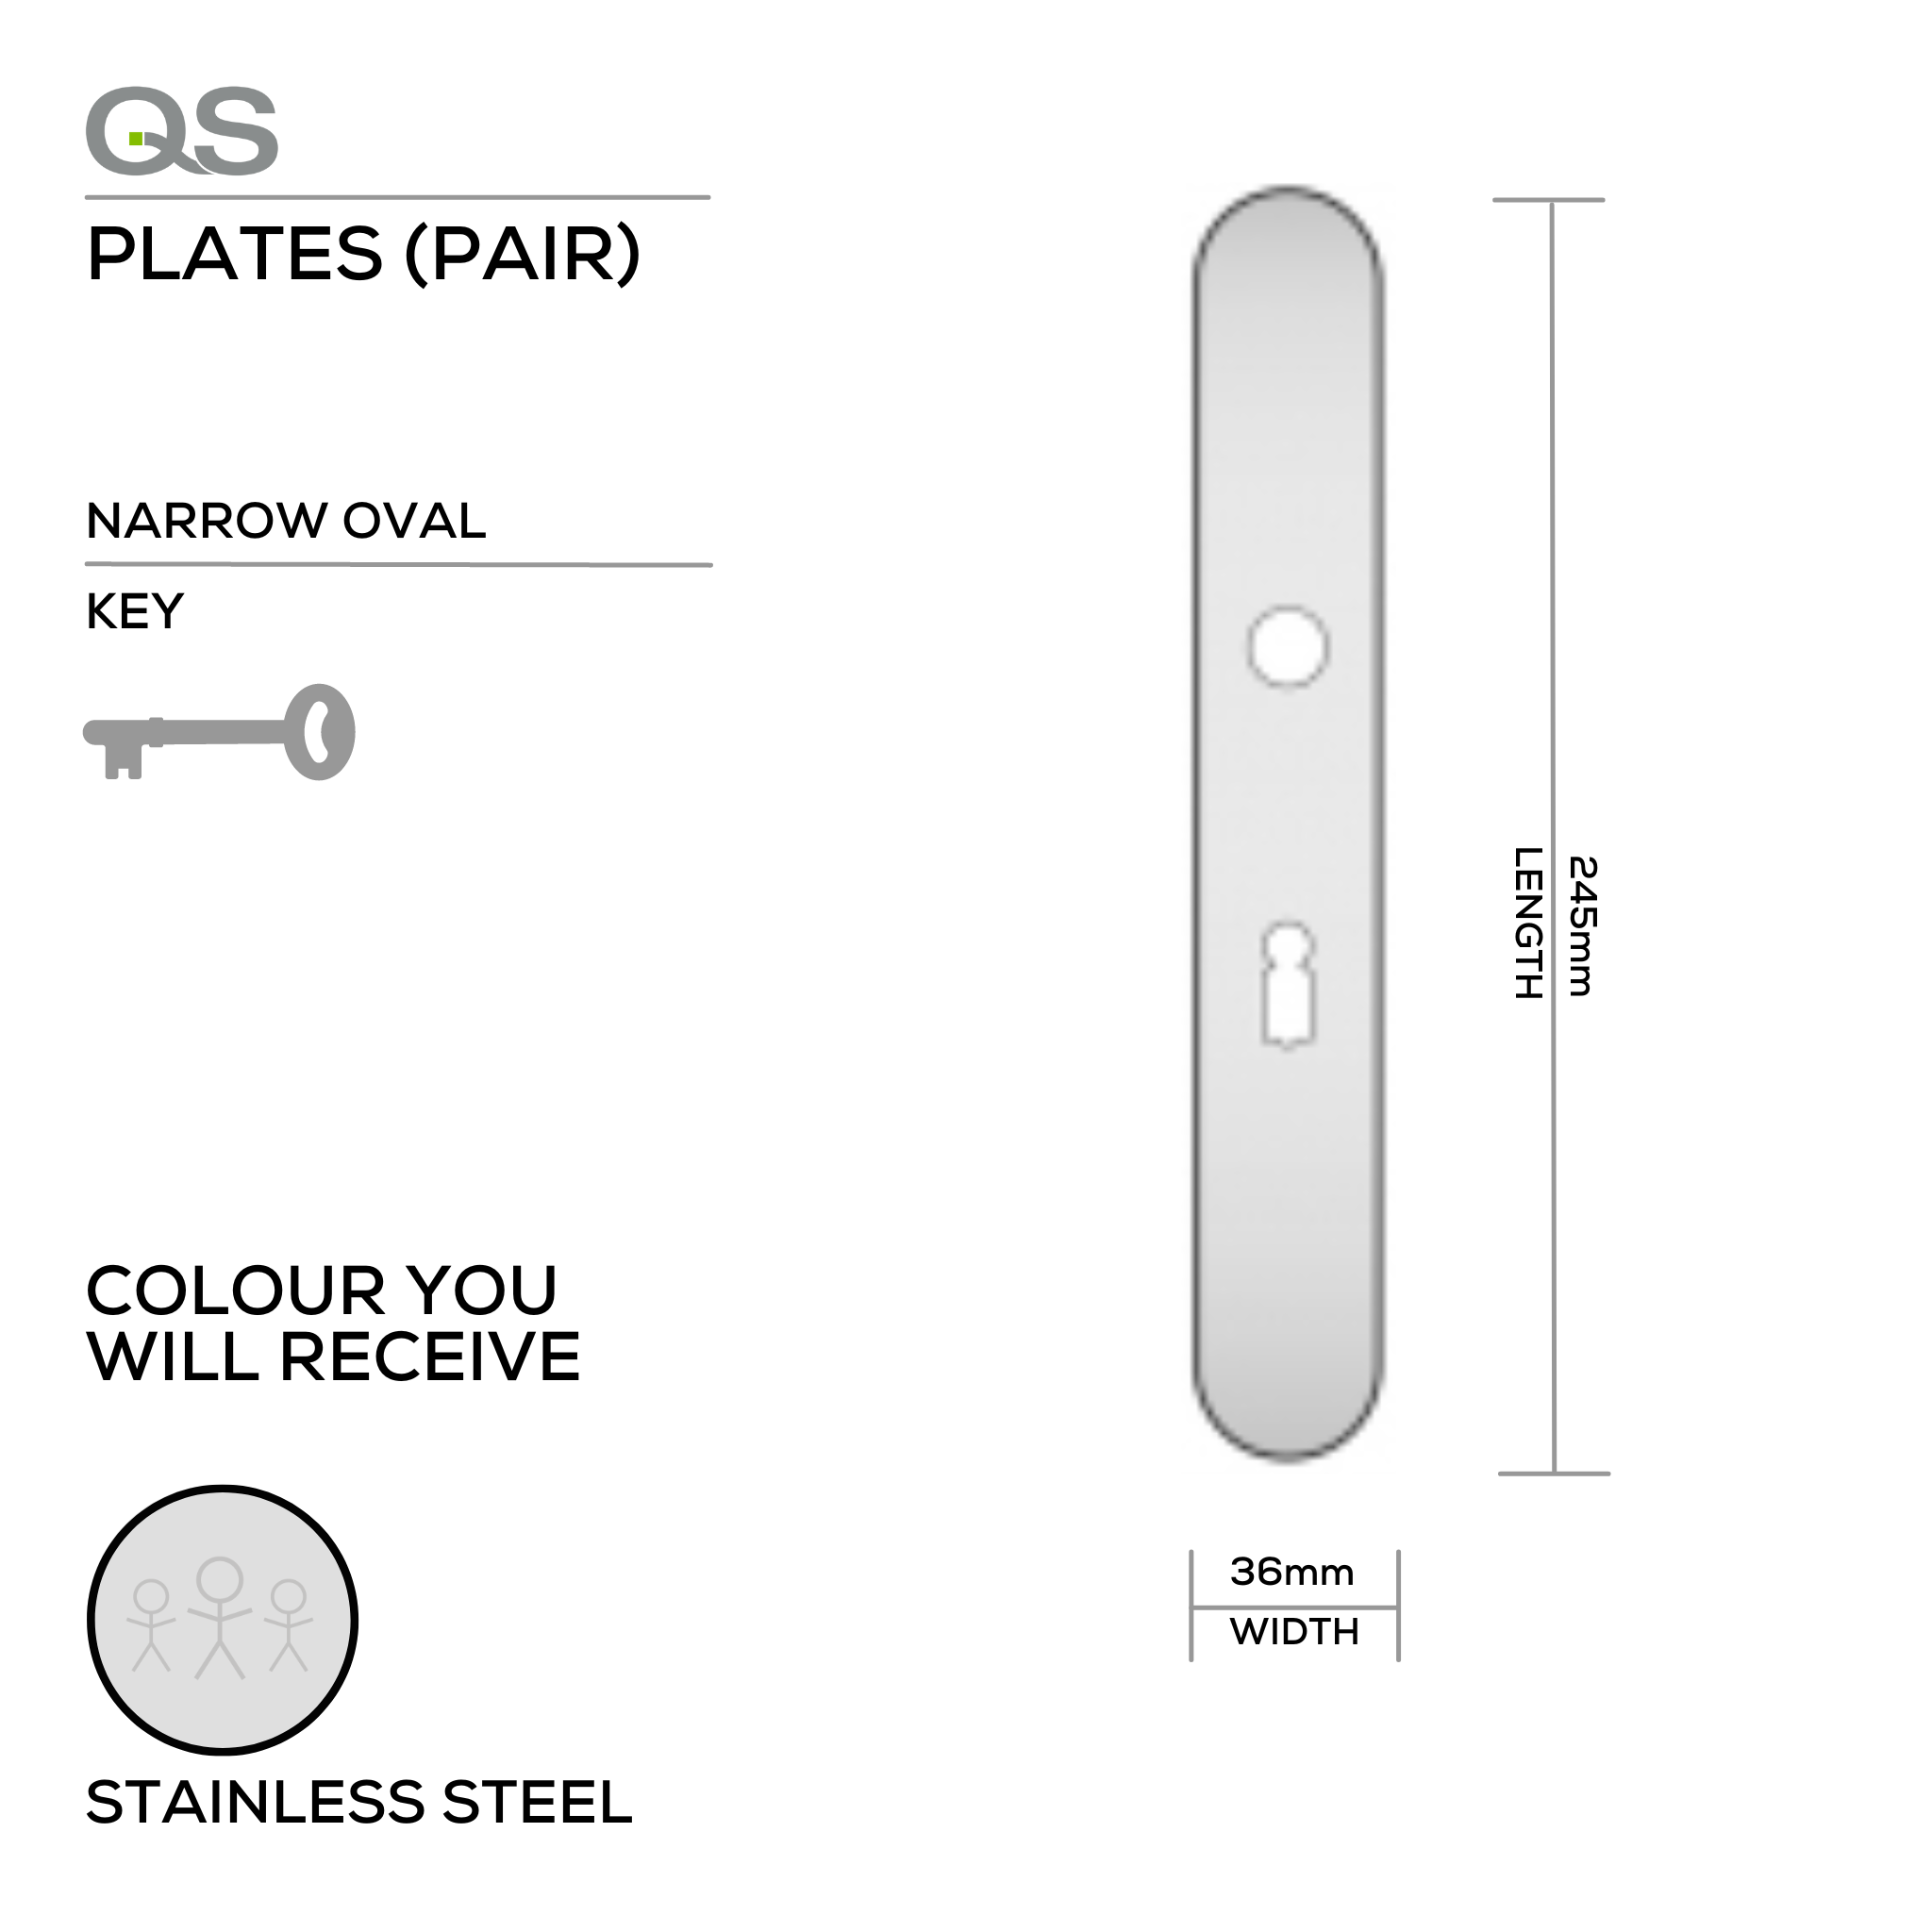 QS4483 KH, Plate, Narrow Oval, 245mm (l) x 36mm (w), Supplied with QS Handle, Stainless Steel, QS